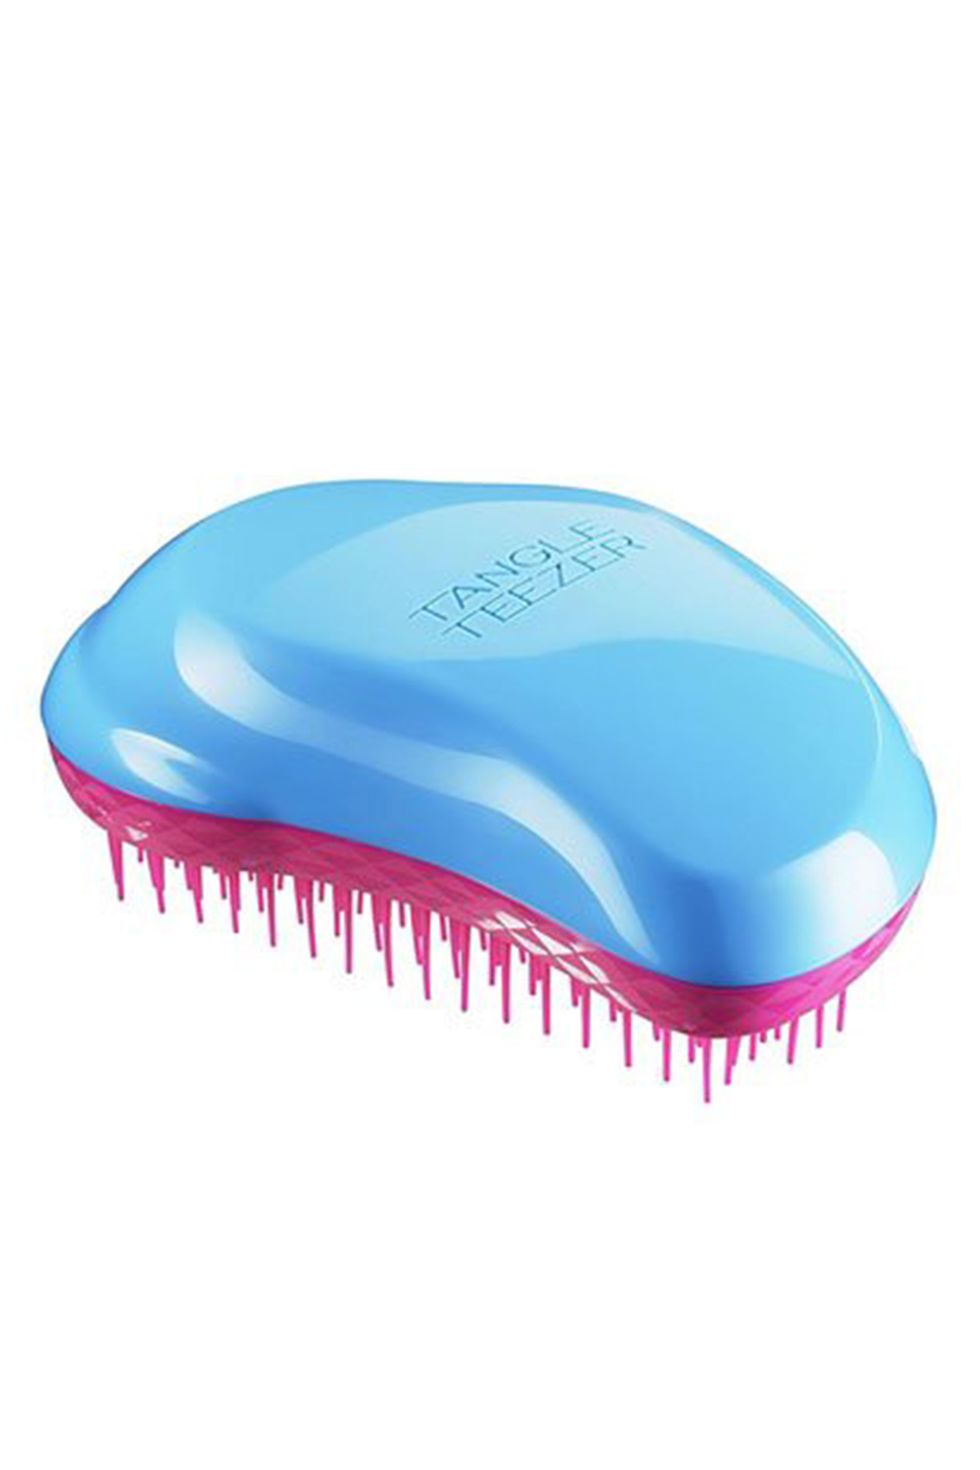 Brush, Turquoise, Comb, Aqua, Automotive cleaning, Hair accessory, Cosmetics, Horse grooming, 